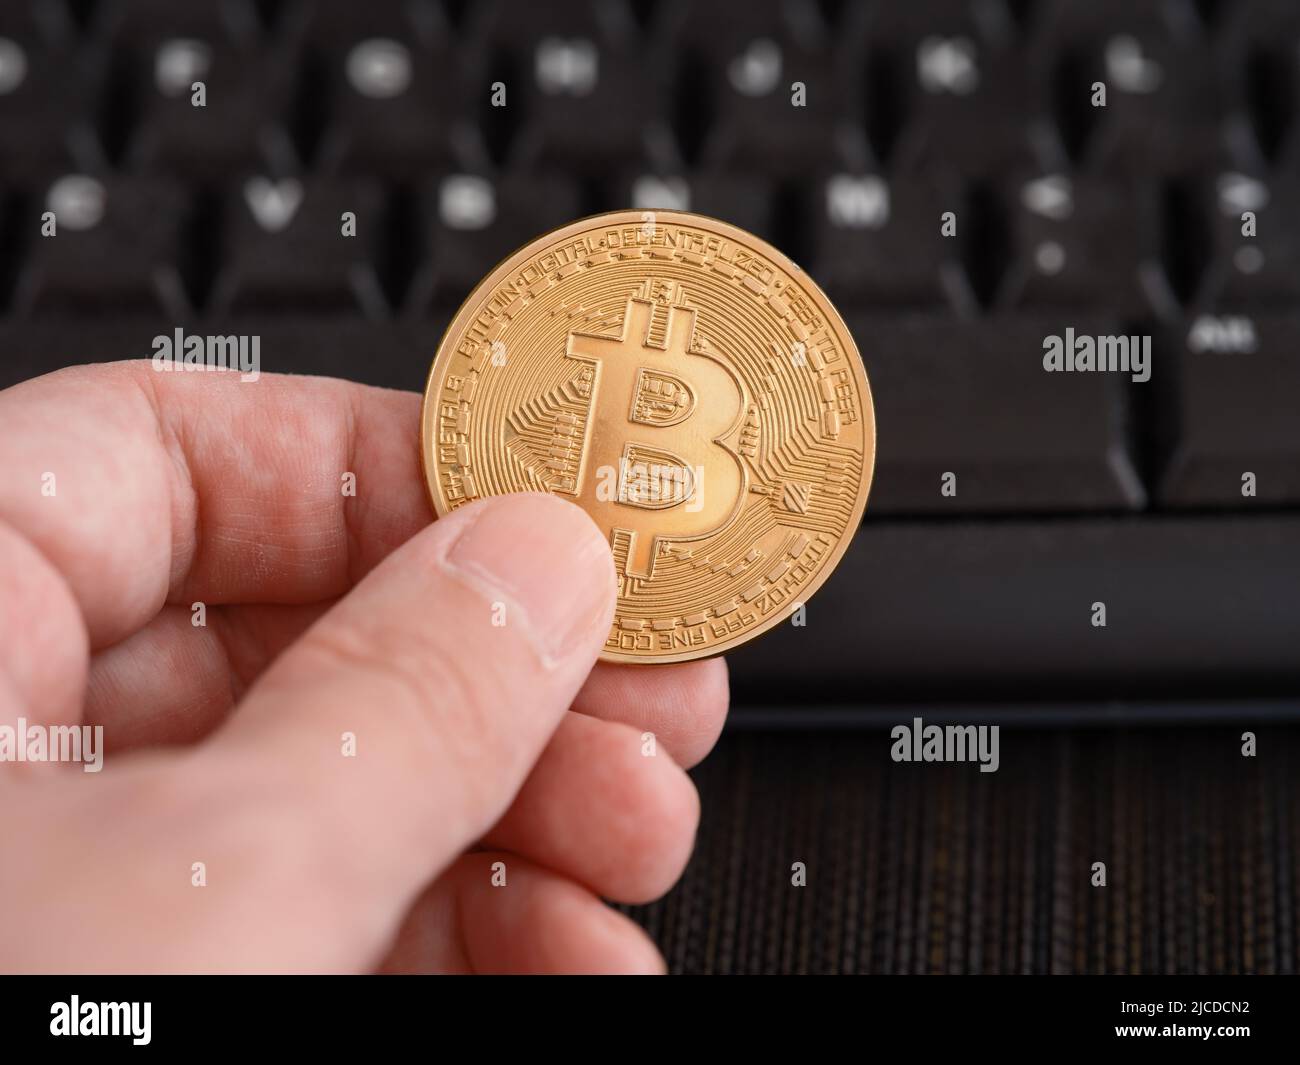 A man holding a golden bitcoin coin in his hand against a computer keyboard. Close up. Stock Photo